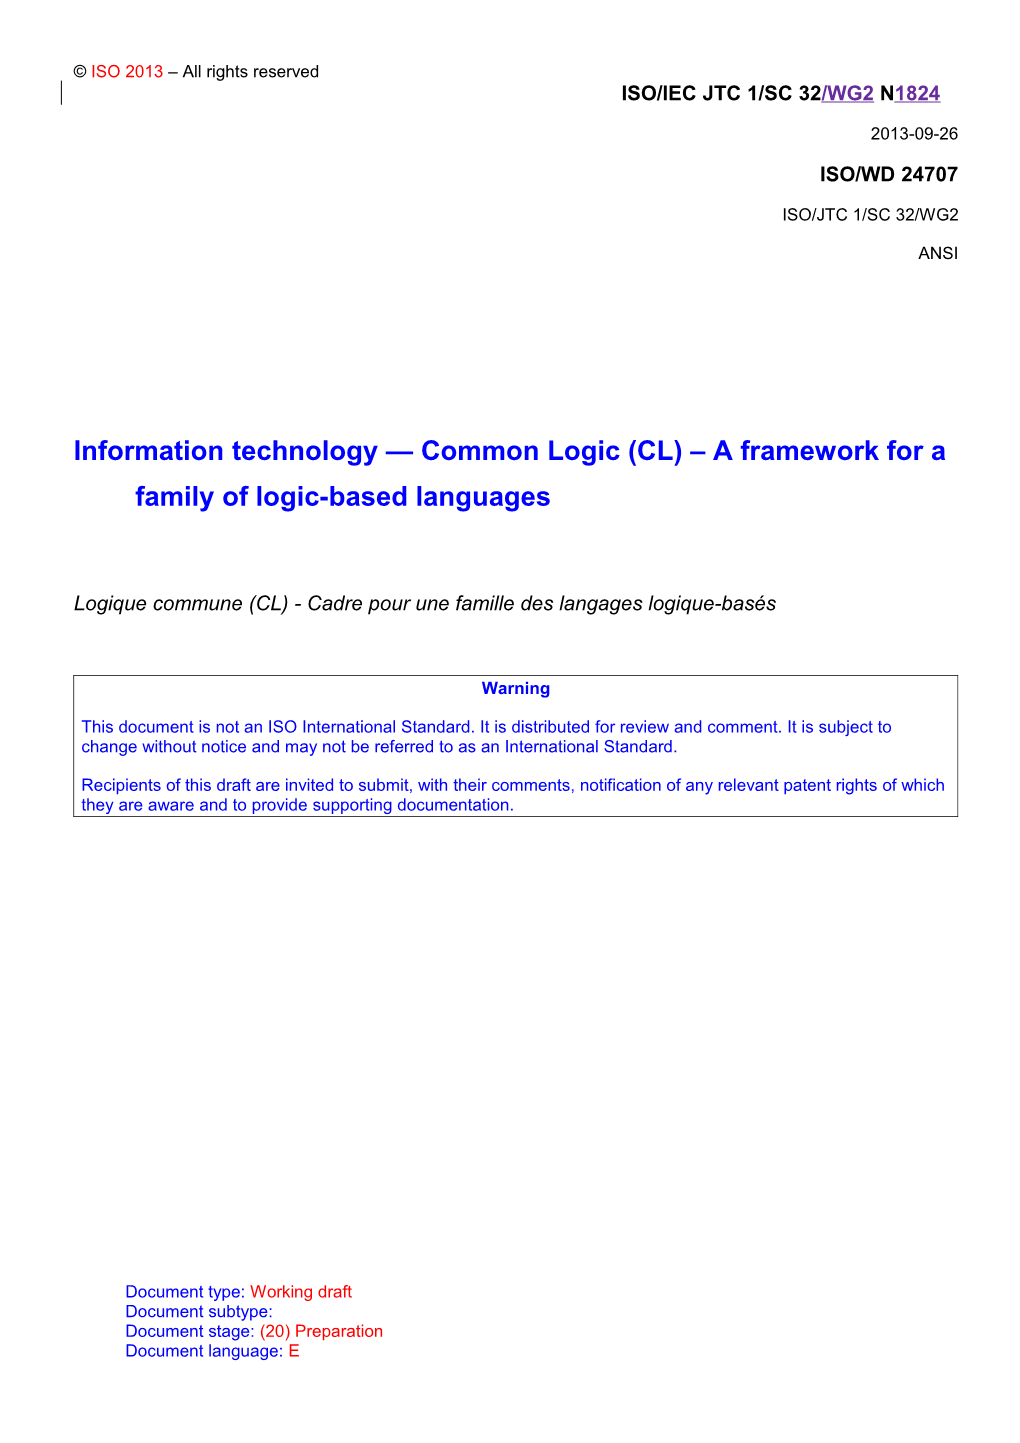 ISO 24707 - Common Logic (CL) a Framework for a Family of Logic-Based Languages